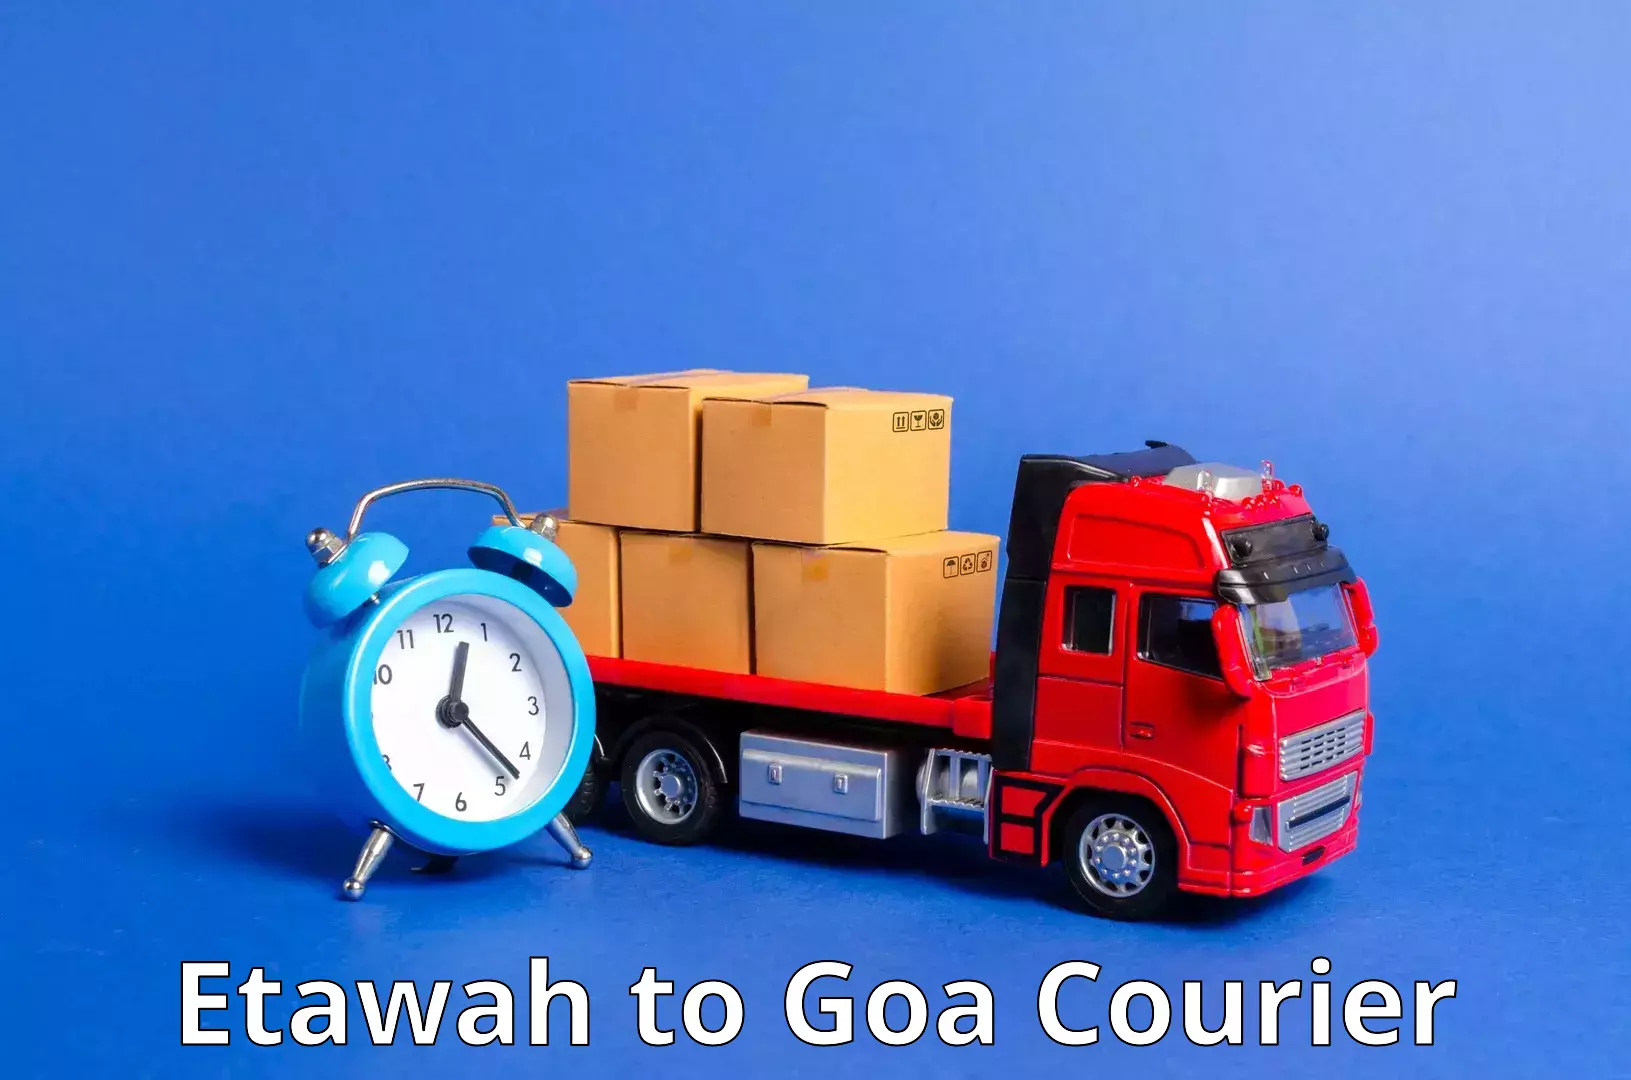 State-of-the-art courier technology Etawah to IIT Goa